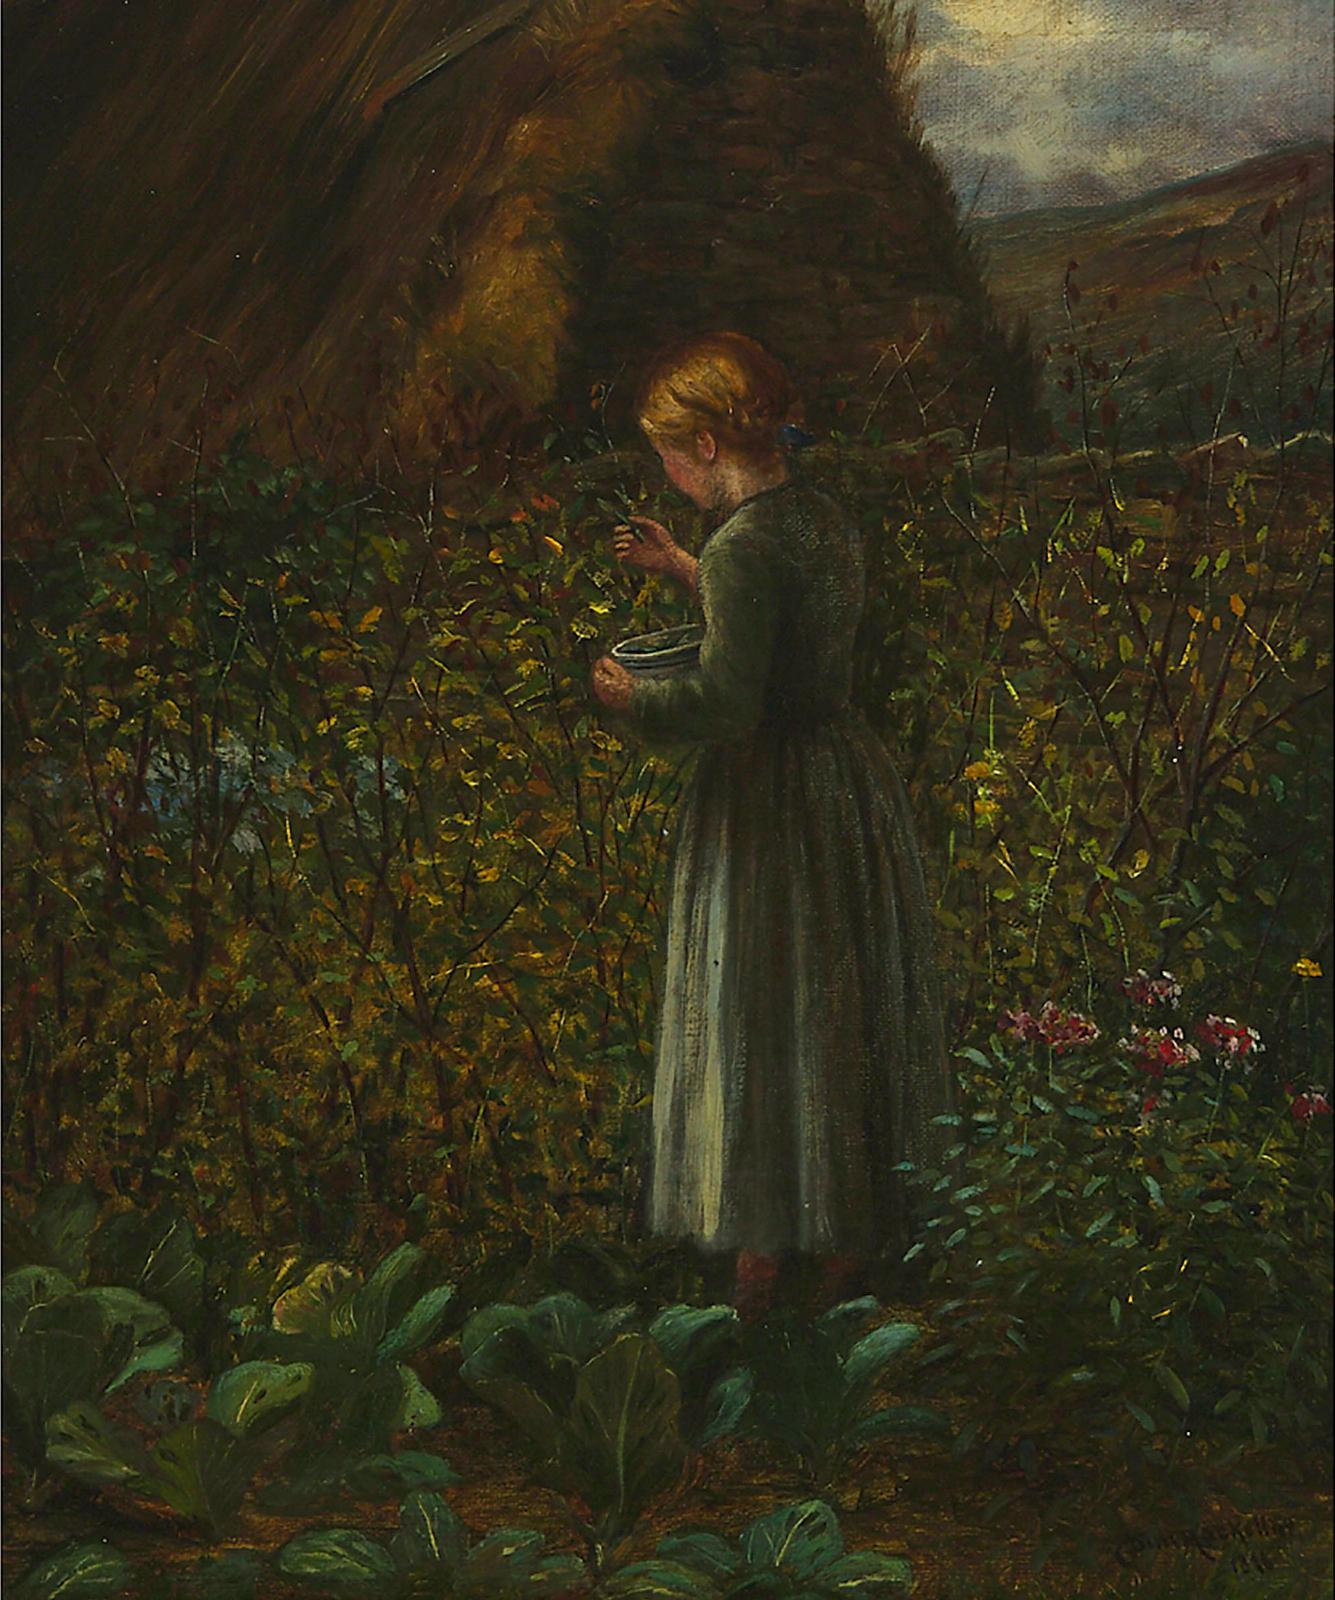 Duncan Mackellar (1849-1908) - Girl In A Vegetable Patch Gathering, 1876